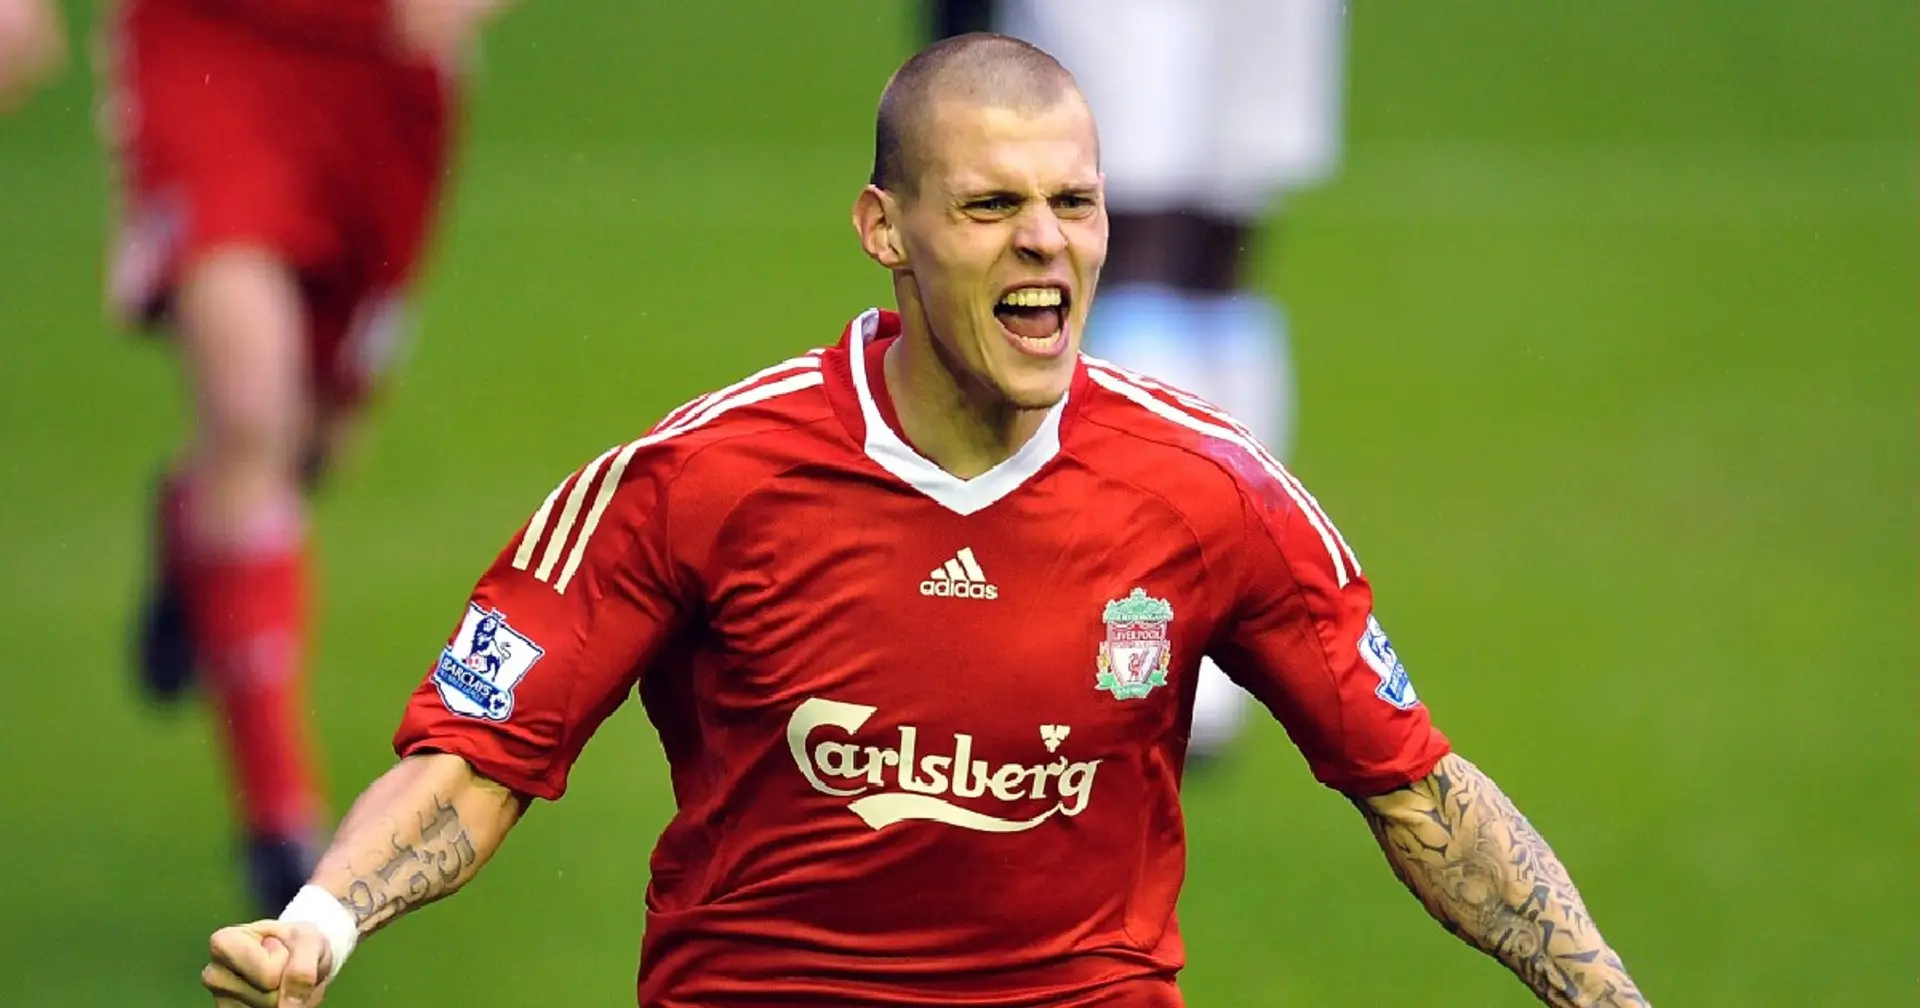 Martin Skrtel announces retirement from football due to back injuries